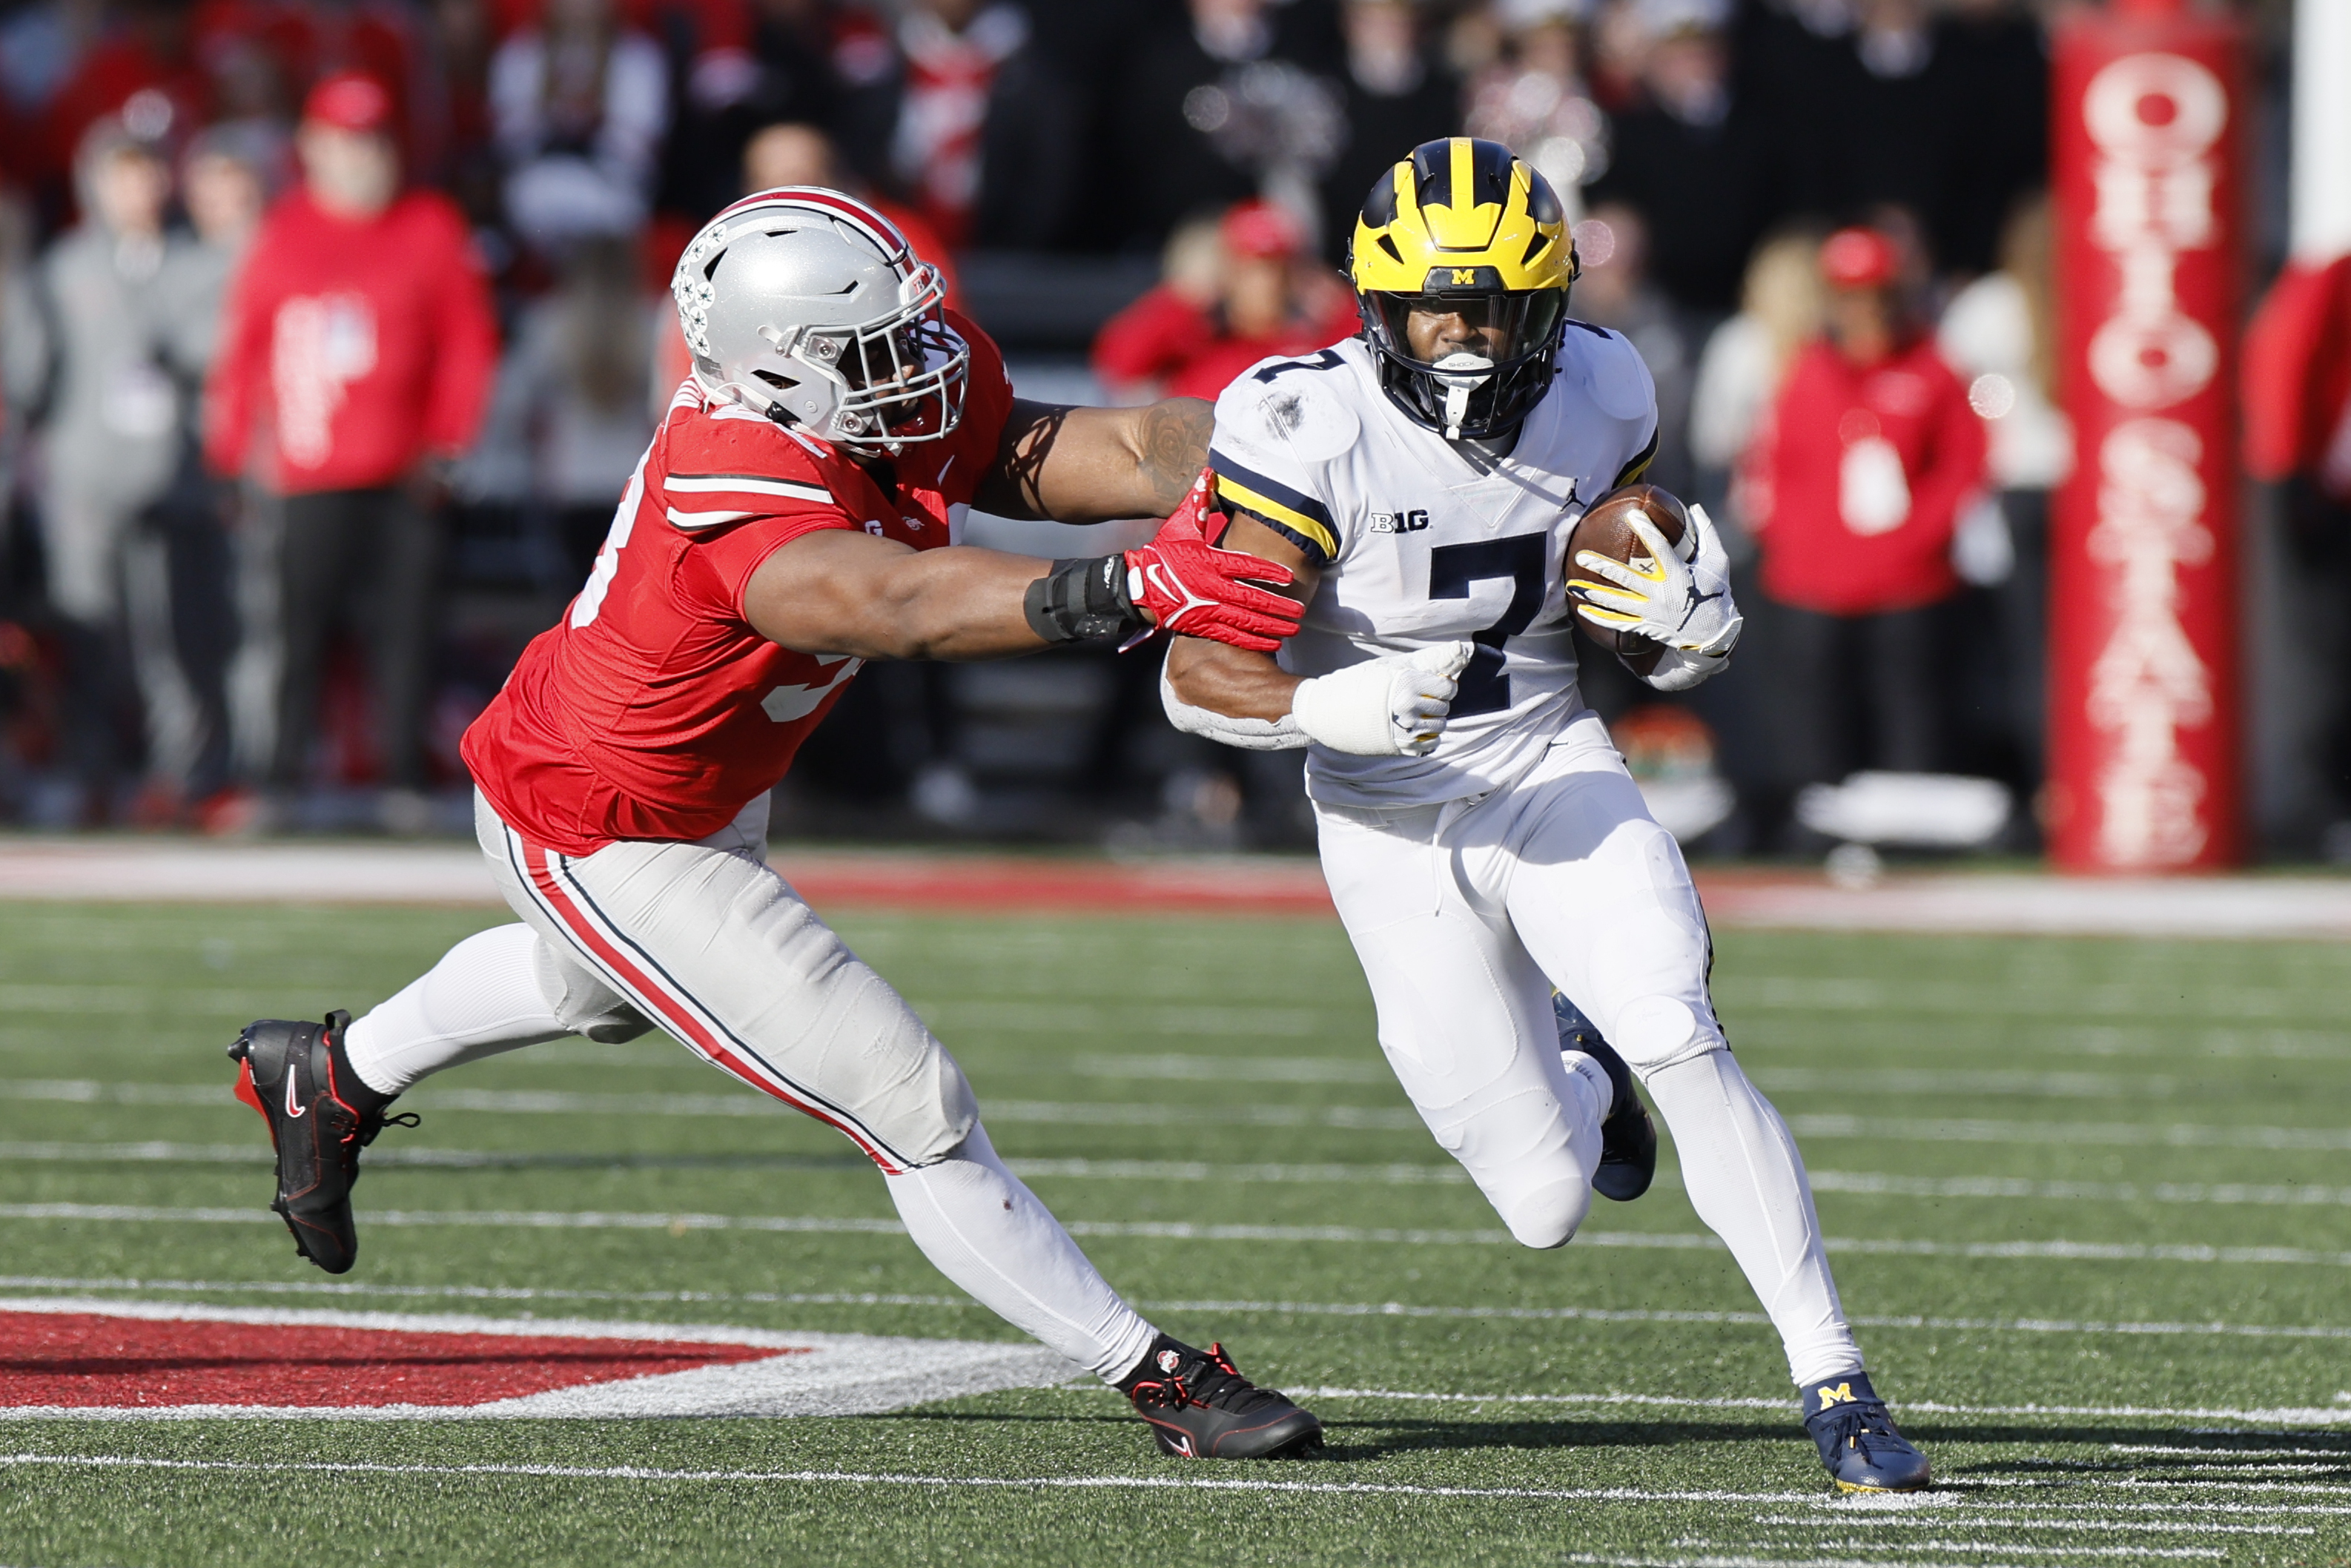 Ohio State vs Michigan: 10 best games in The Game history